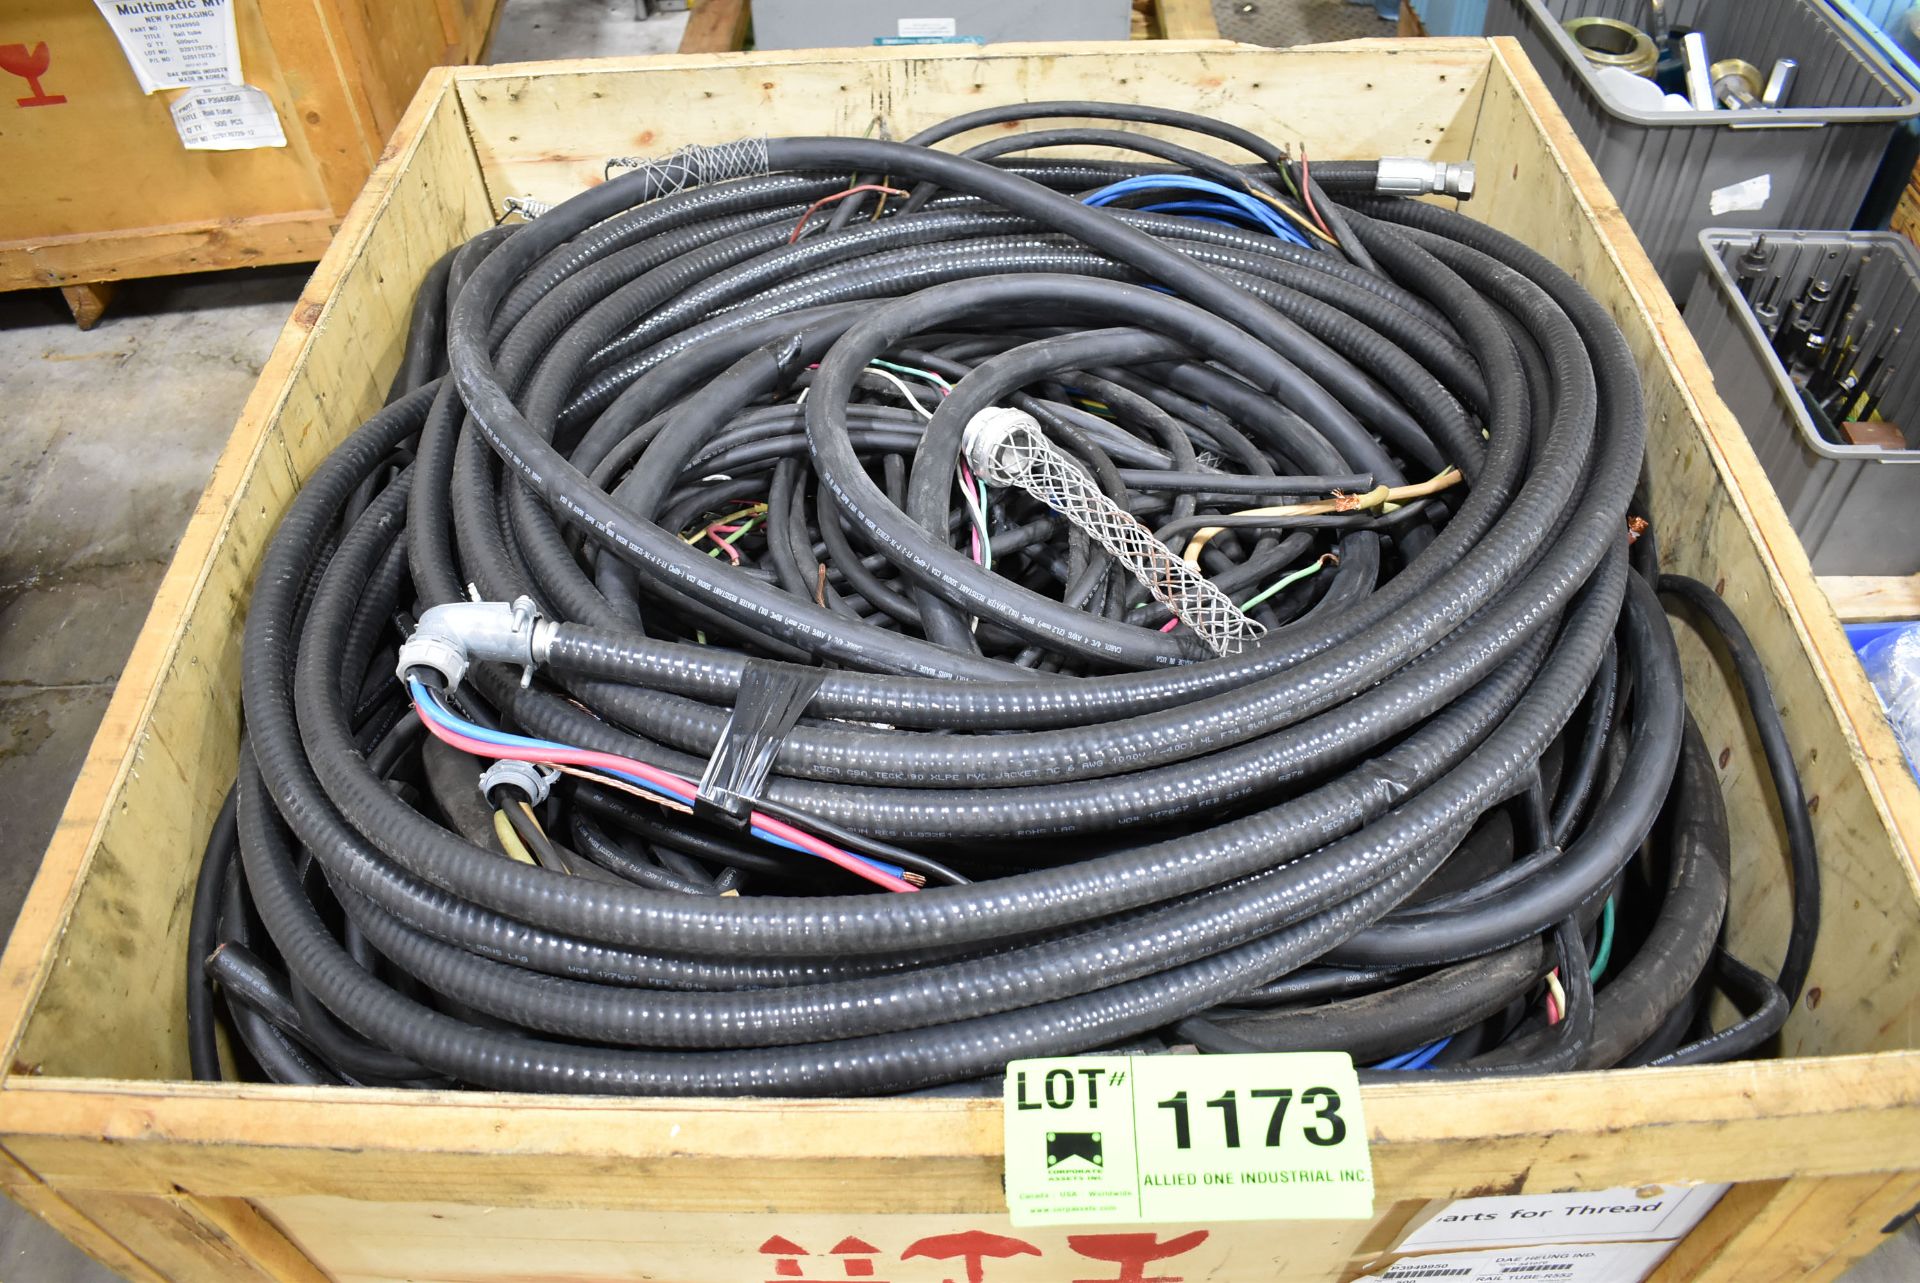 LOT/ CONTENTS OF CRATE CONSISTING OF WIRE